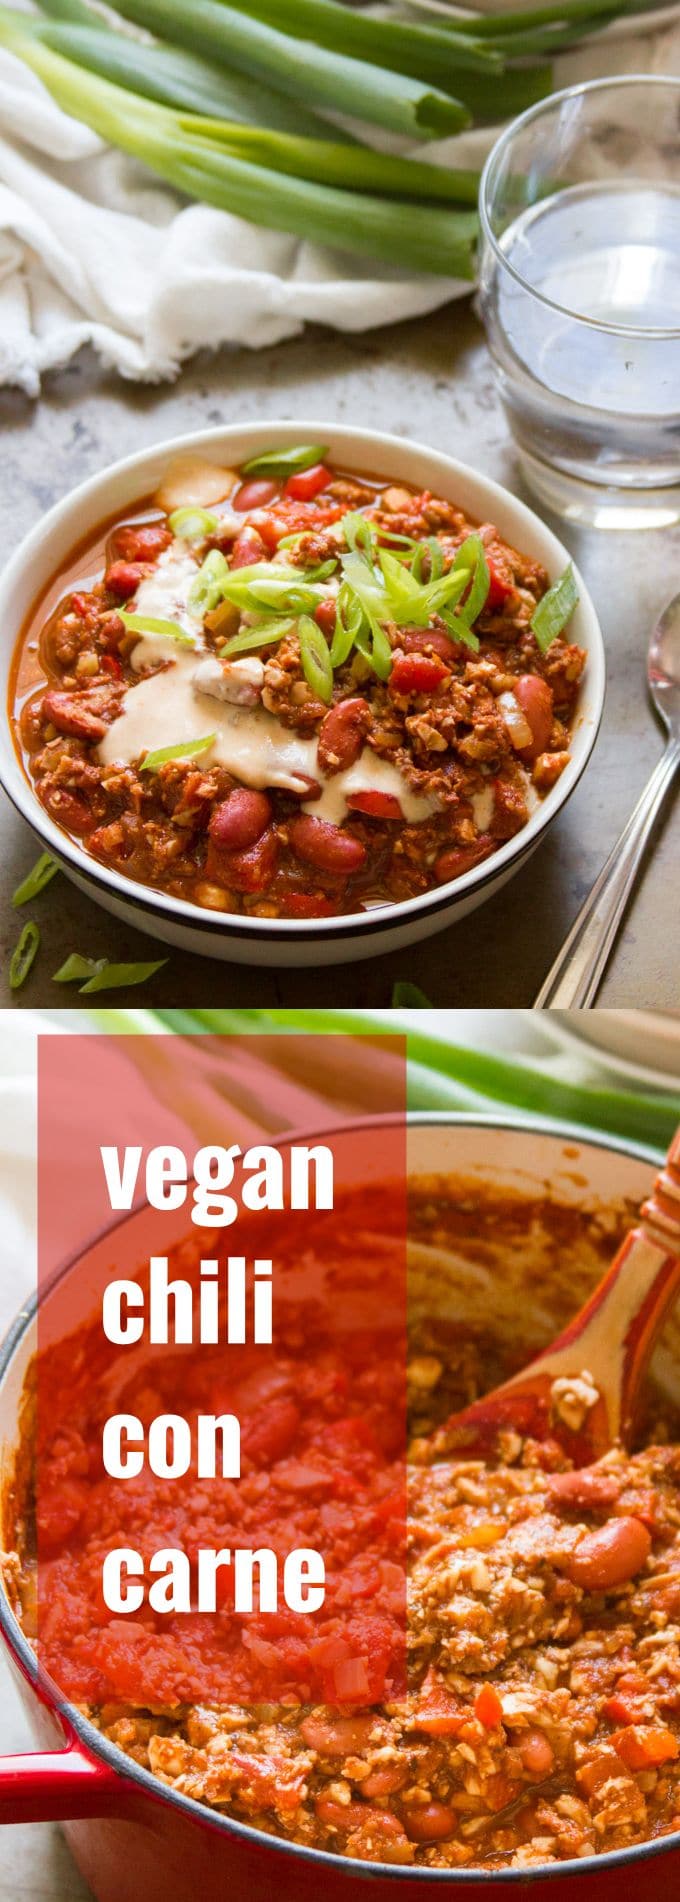 Meatless Chili con Carne